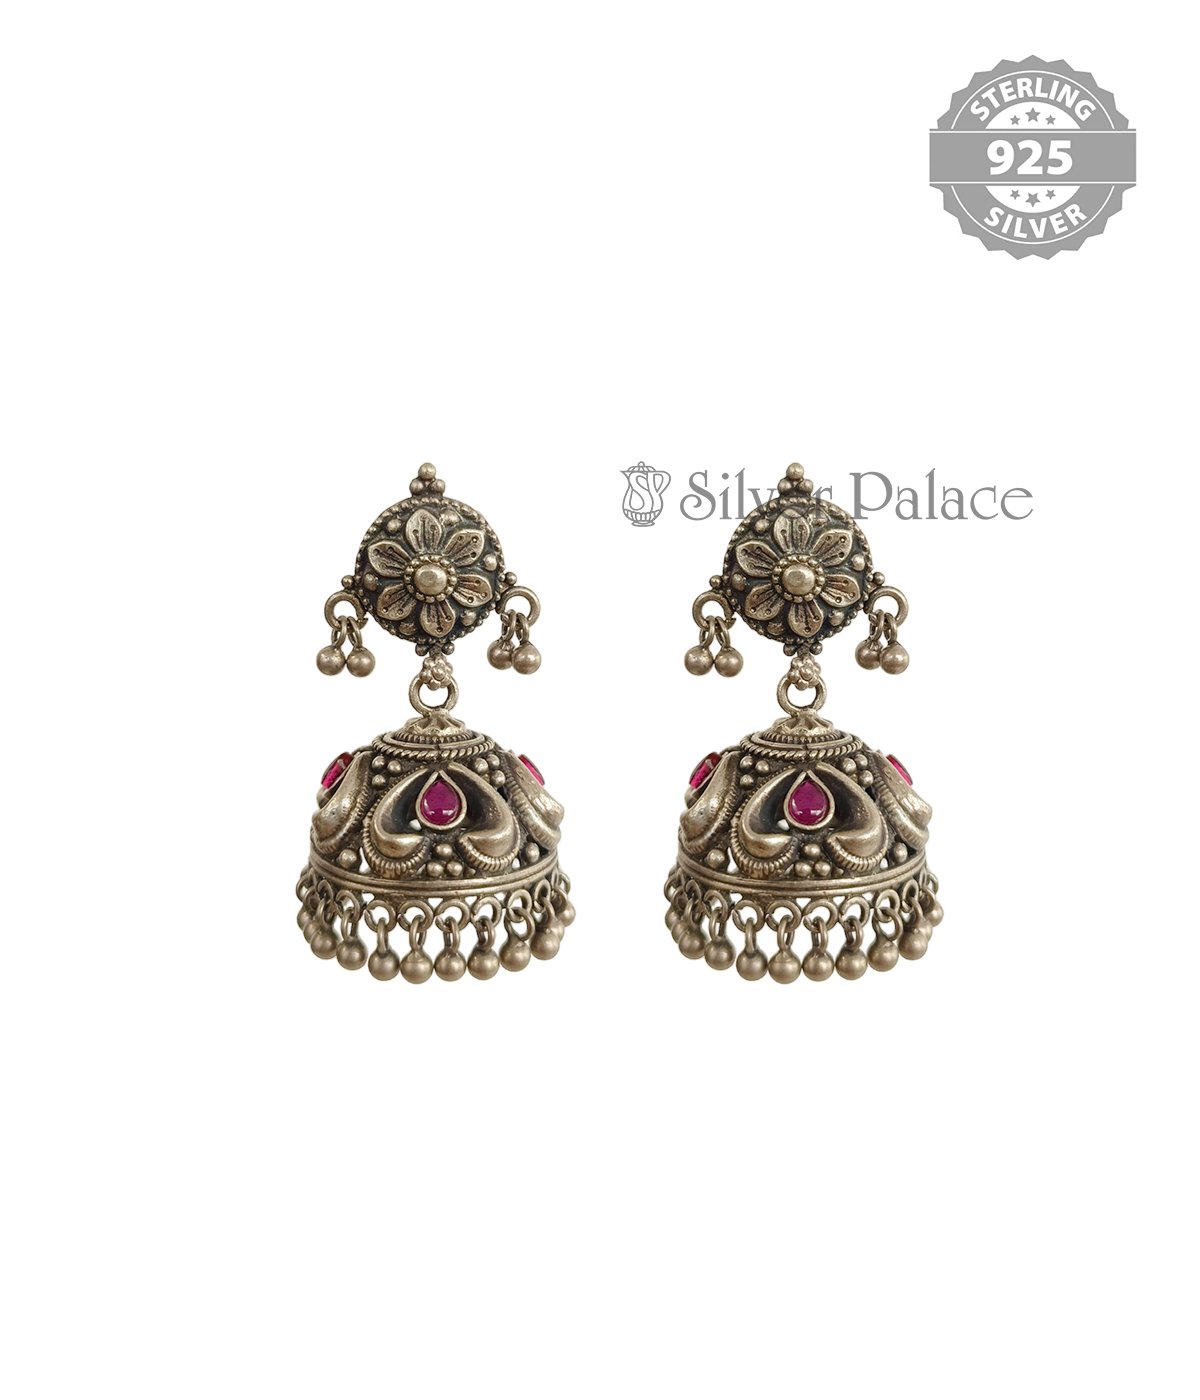 92.5 STERLING SILVER  SILVER BEAD JHUMKAS HAND NAGAS WITH SILVER BALLS